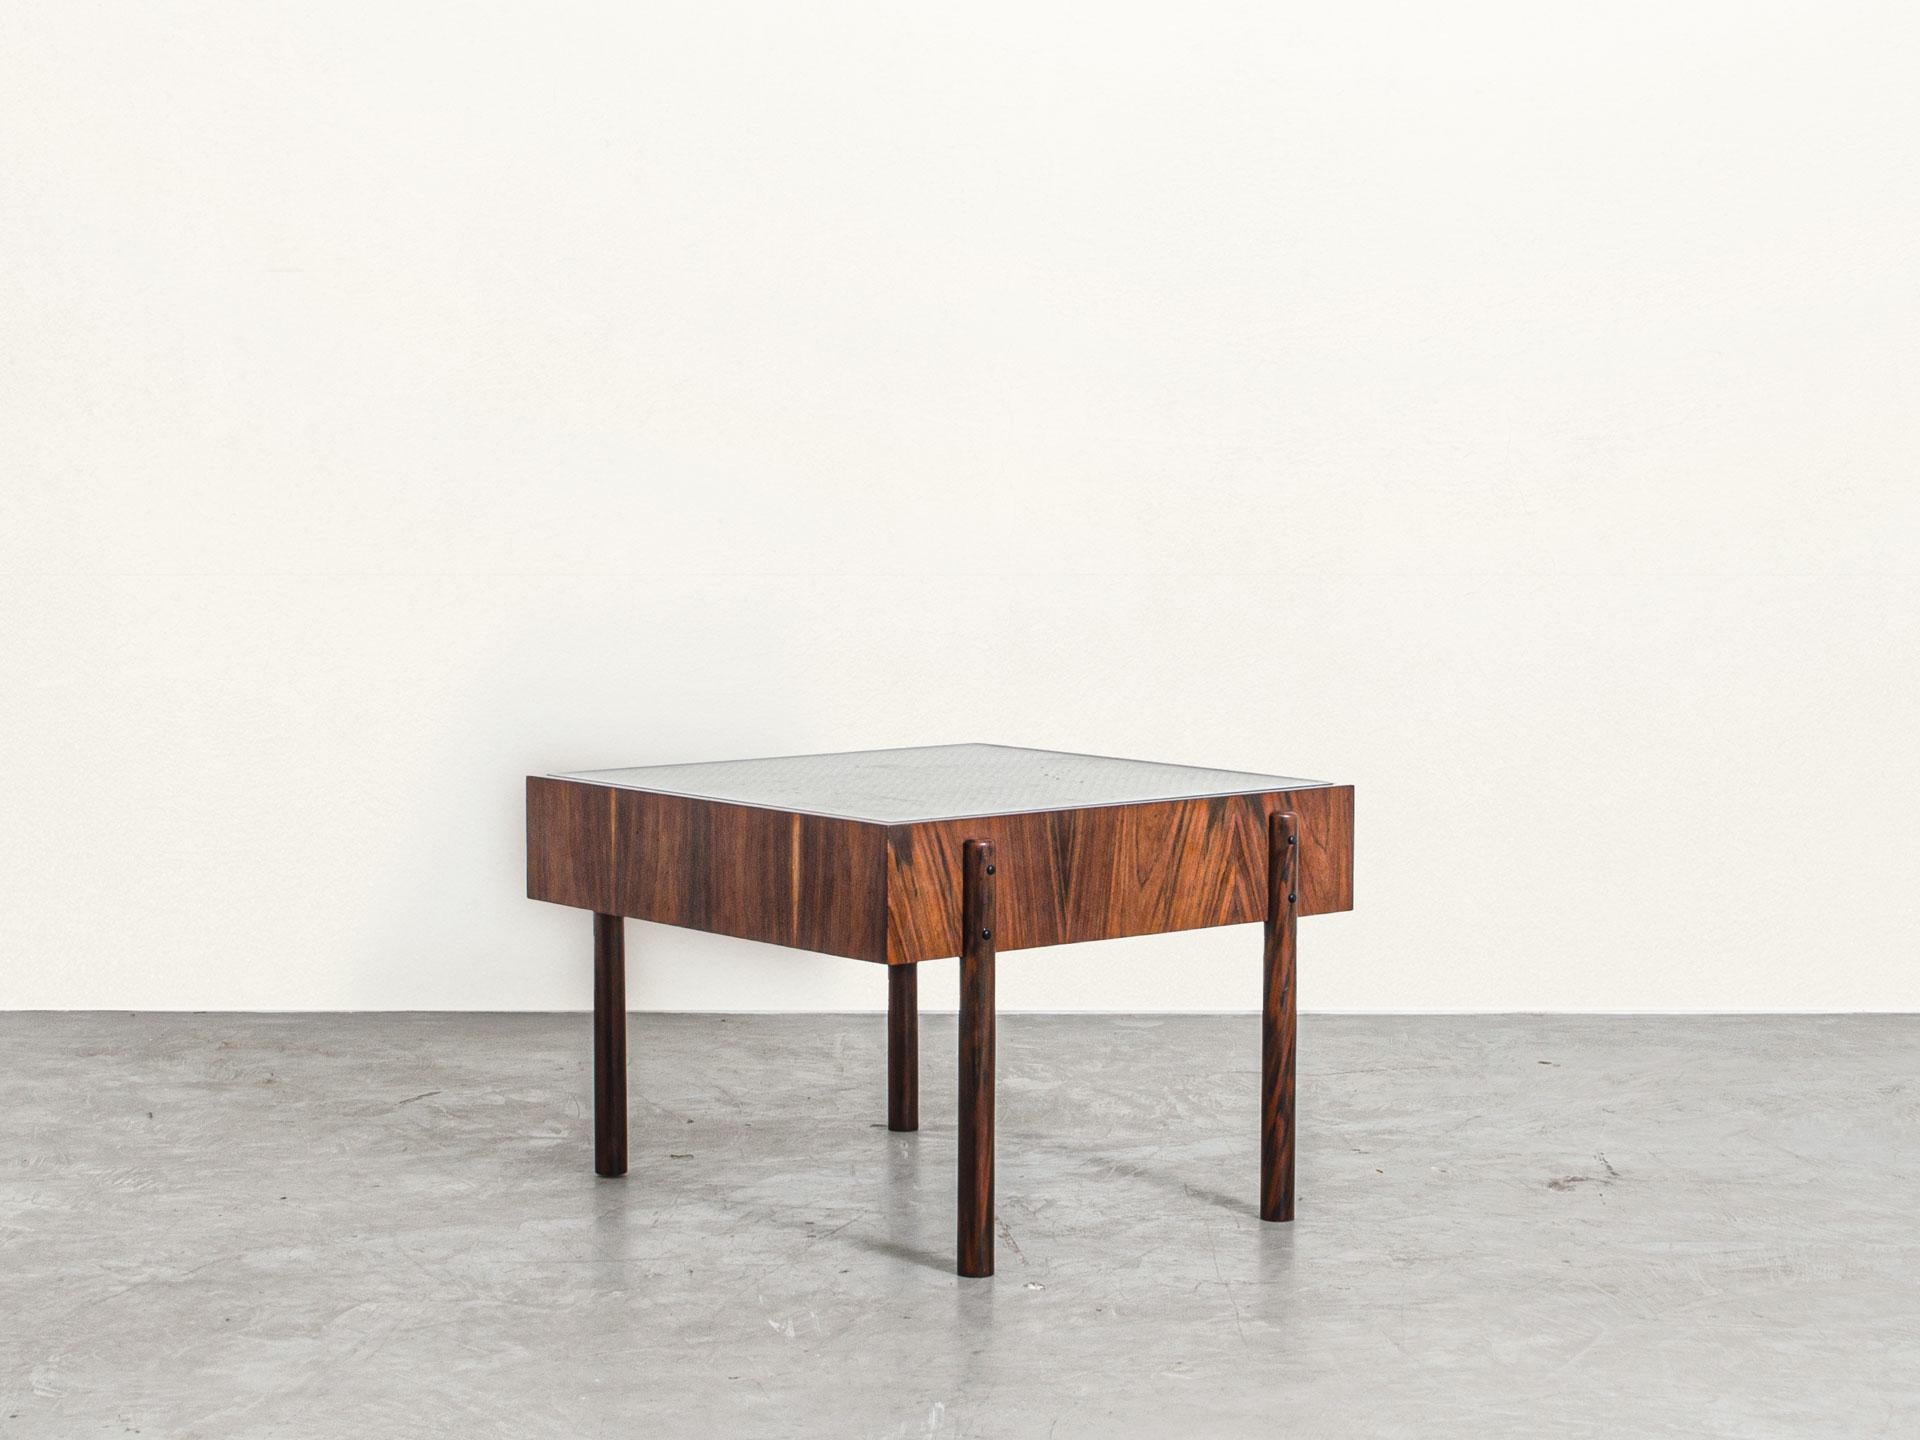 The square Adi table is a 60's-inspired side table and it was started to be produced in 2019. 

The simple lines from the minimalistic design combined with the roughness of the materials together bring a very special quality to the piece, that